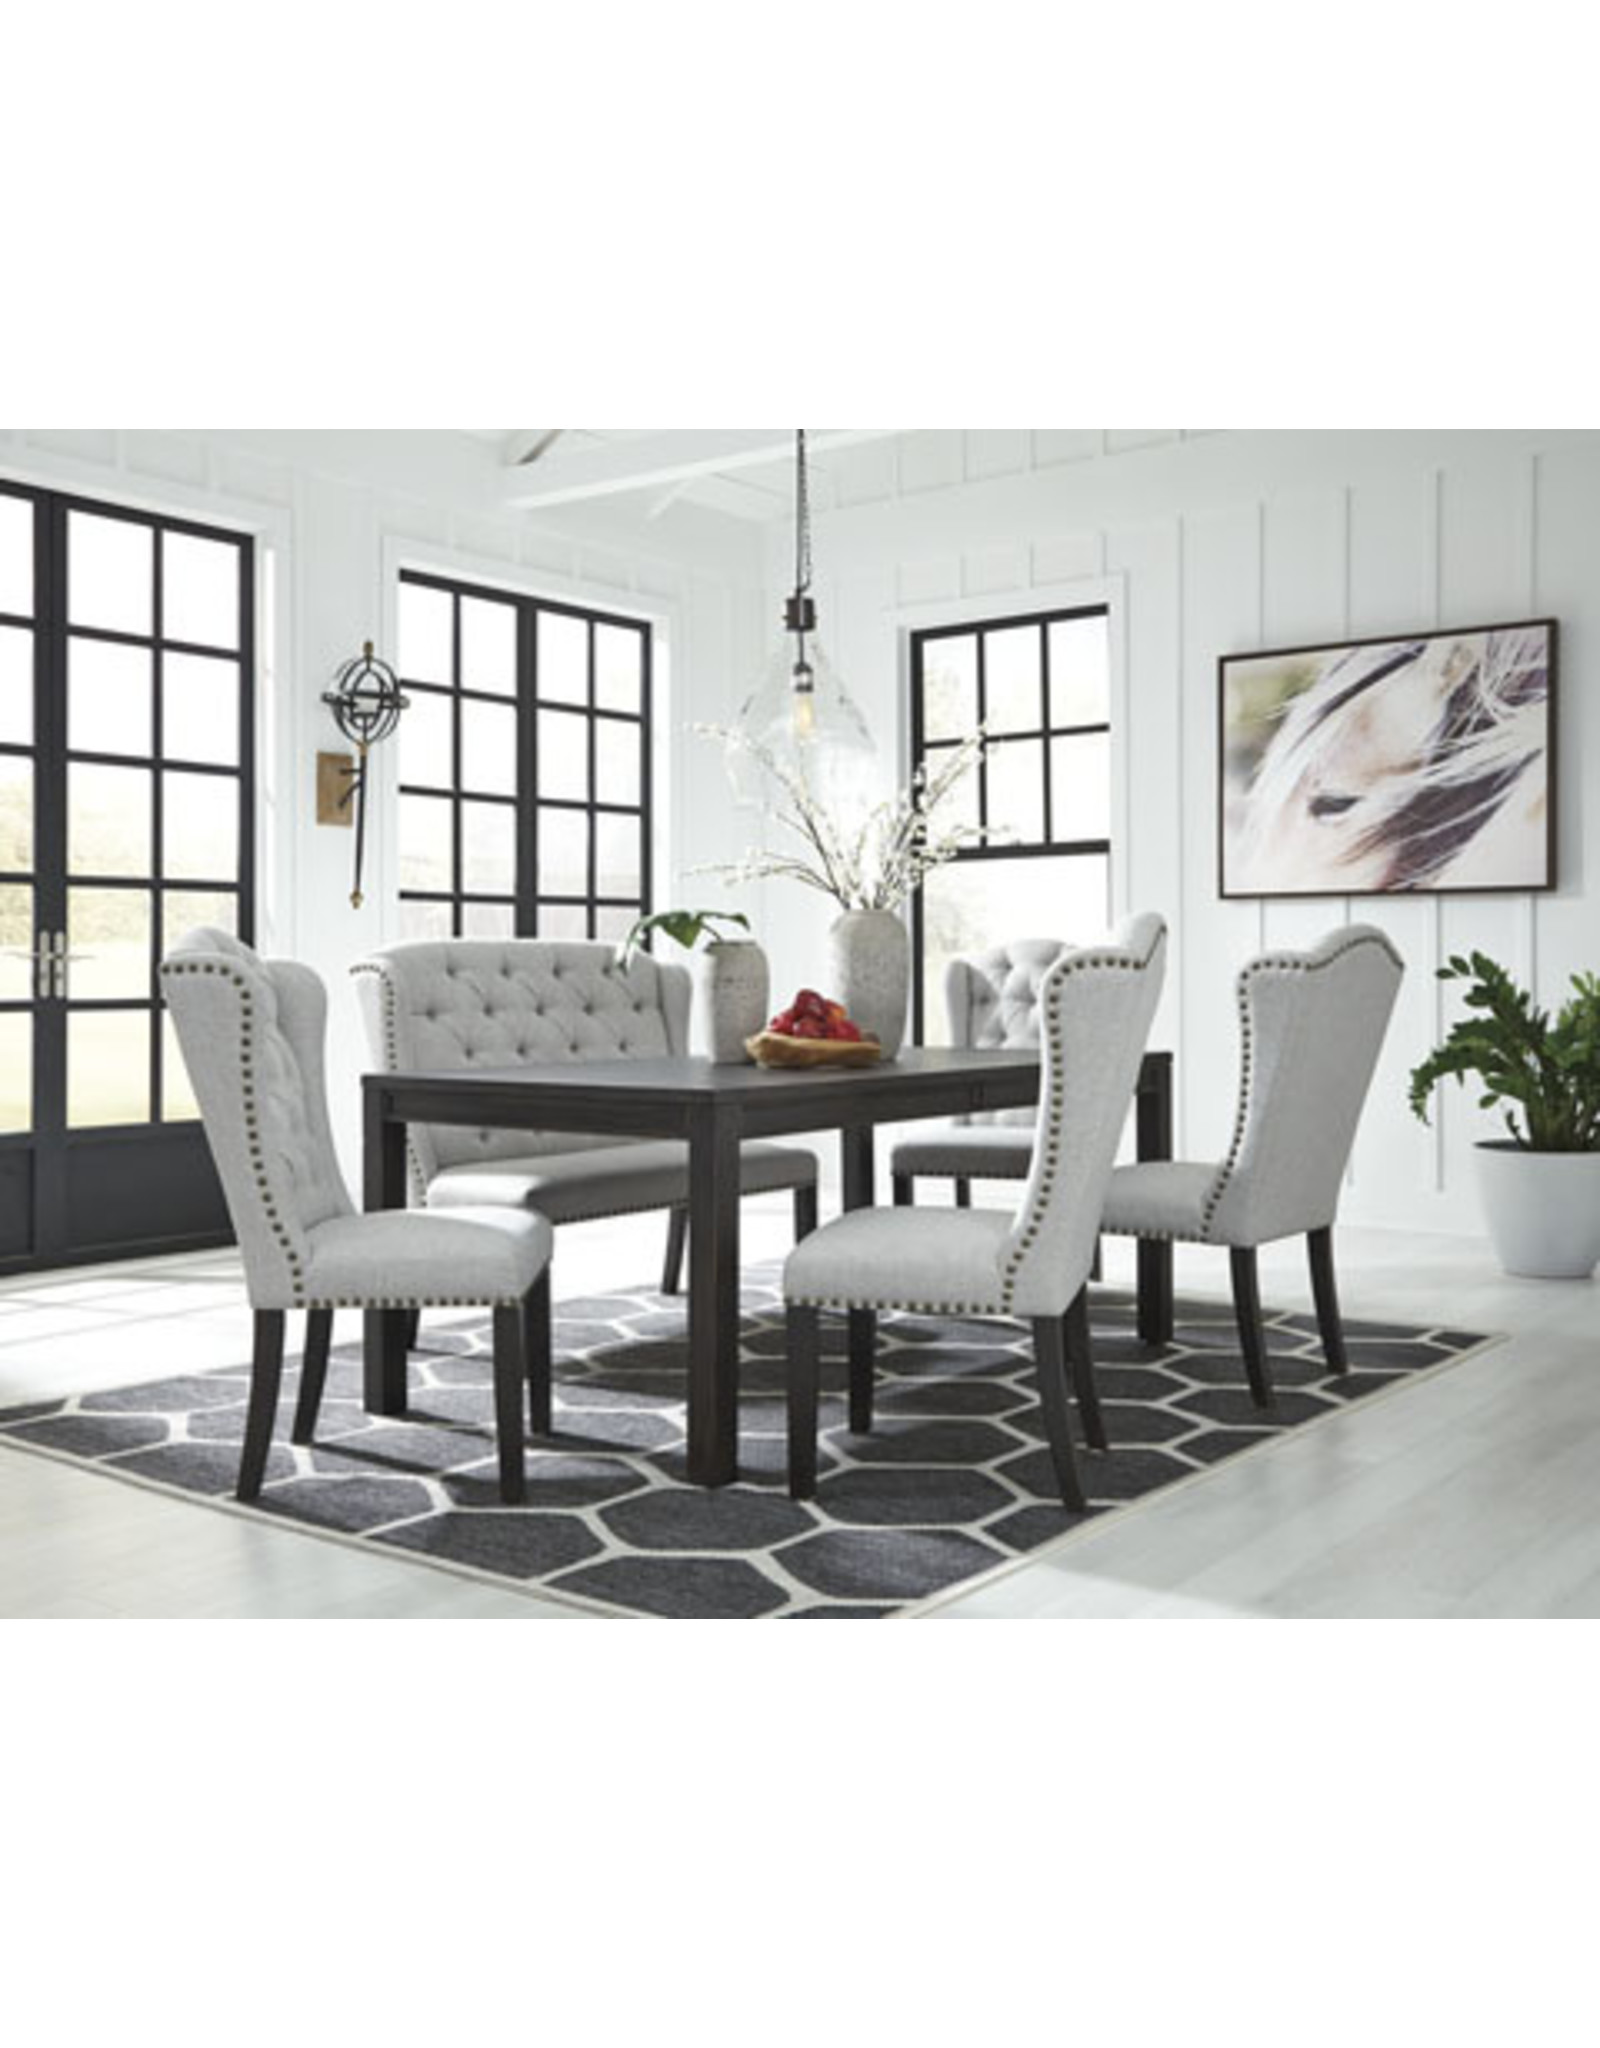 Jeanette D702 Table/6 Chairs